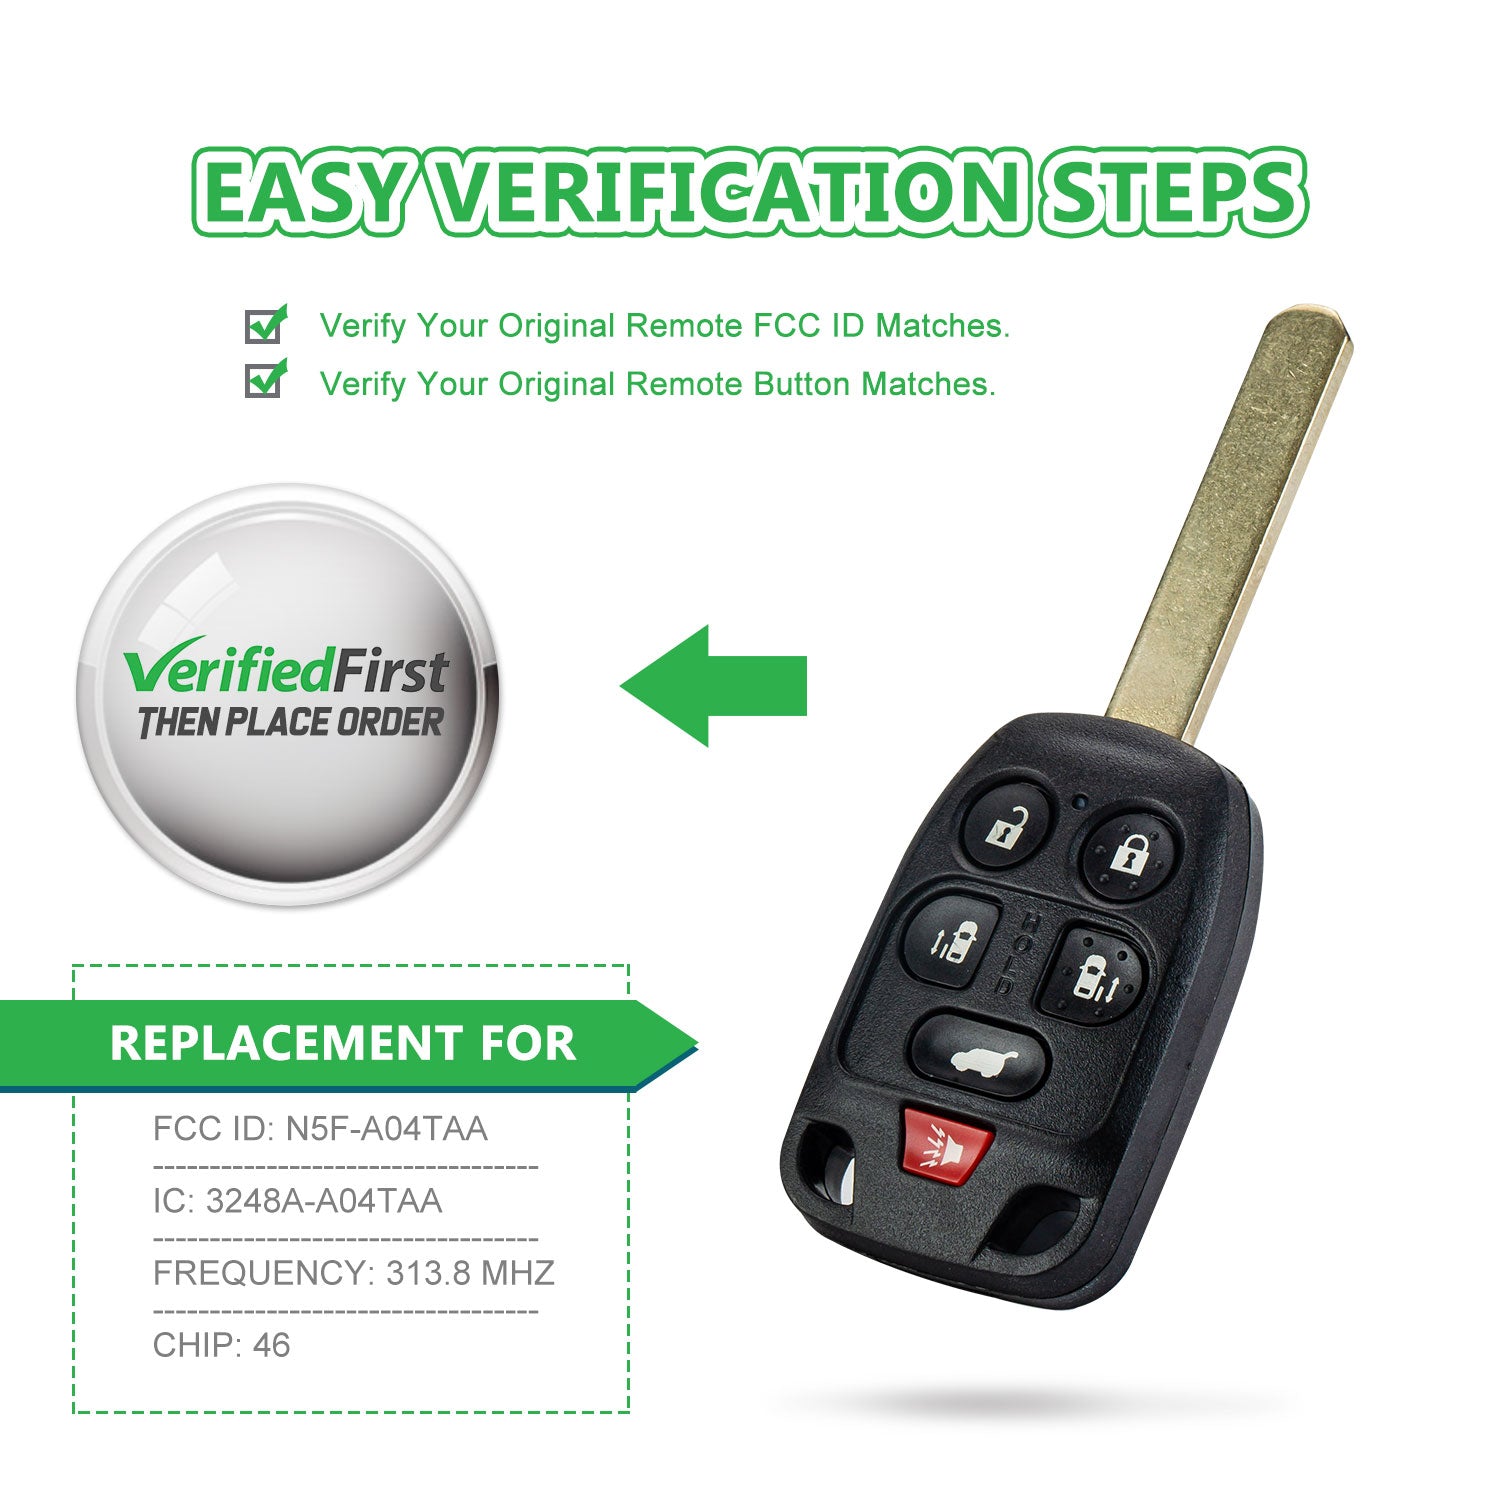 Lots of 5 Remote Car Key Fob Replacement for Honda N5F-A04TAA fits 2011 2012 2013 2014 Odyssey 6 Button